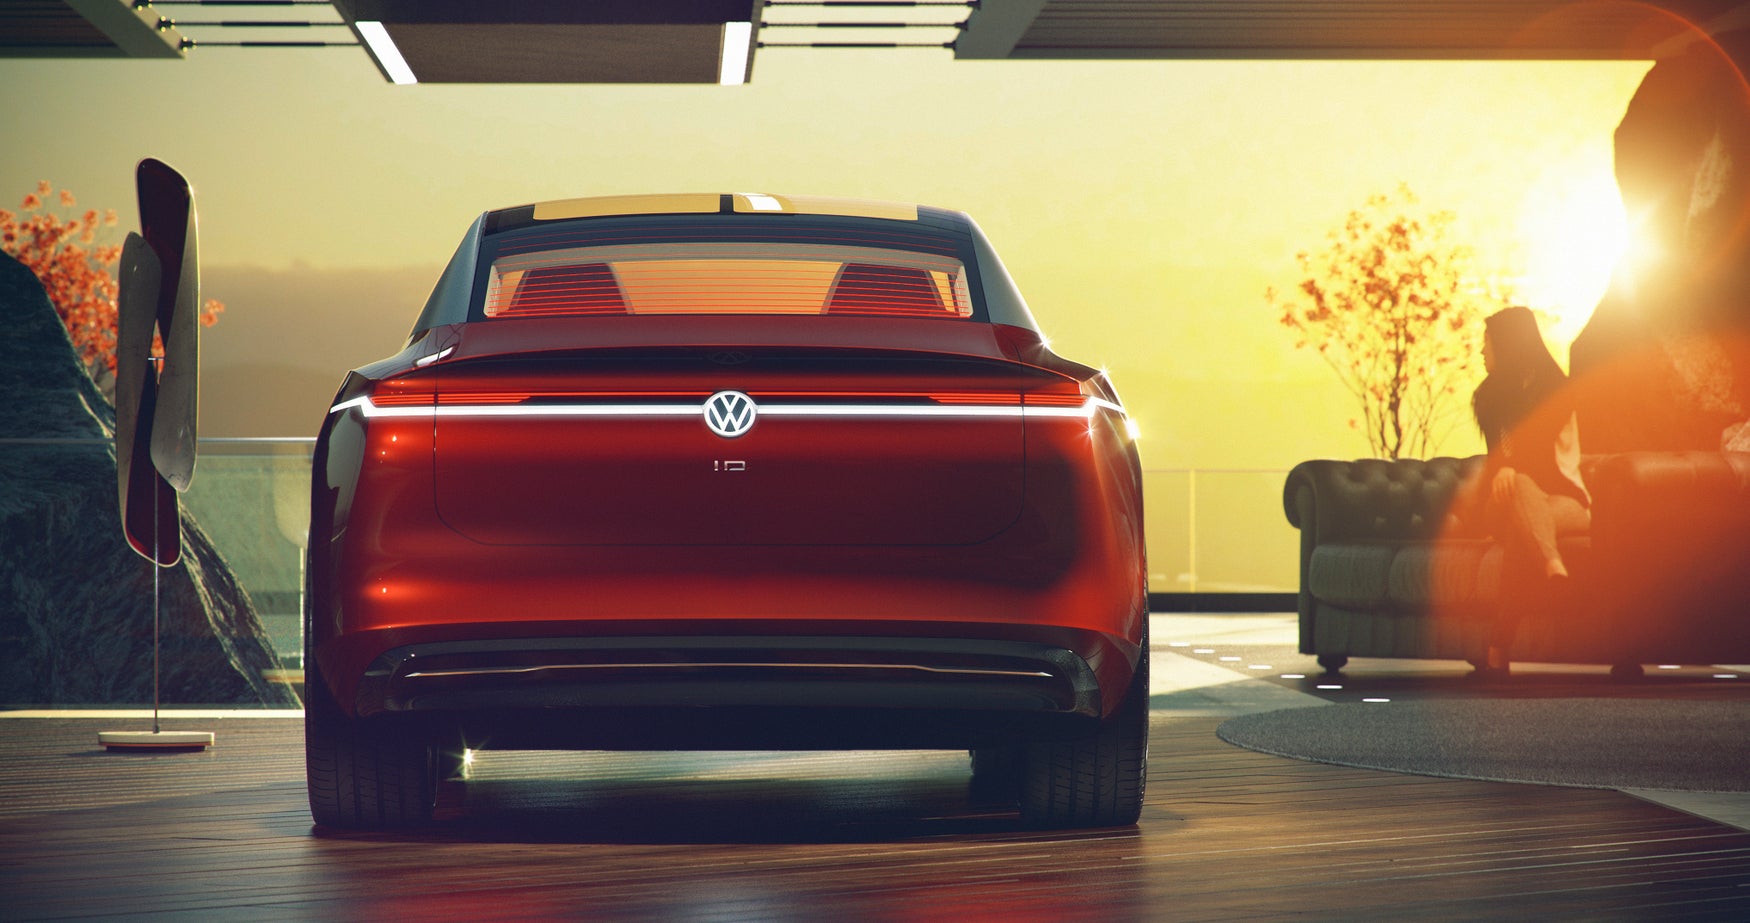 Volkswagen ID.Vizzion in red from behind facing setting sun